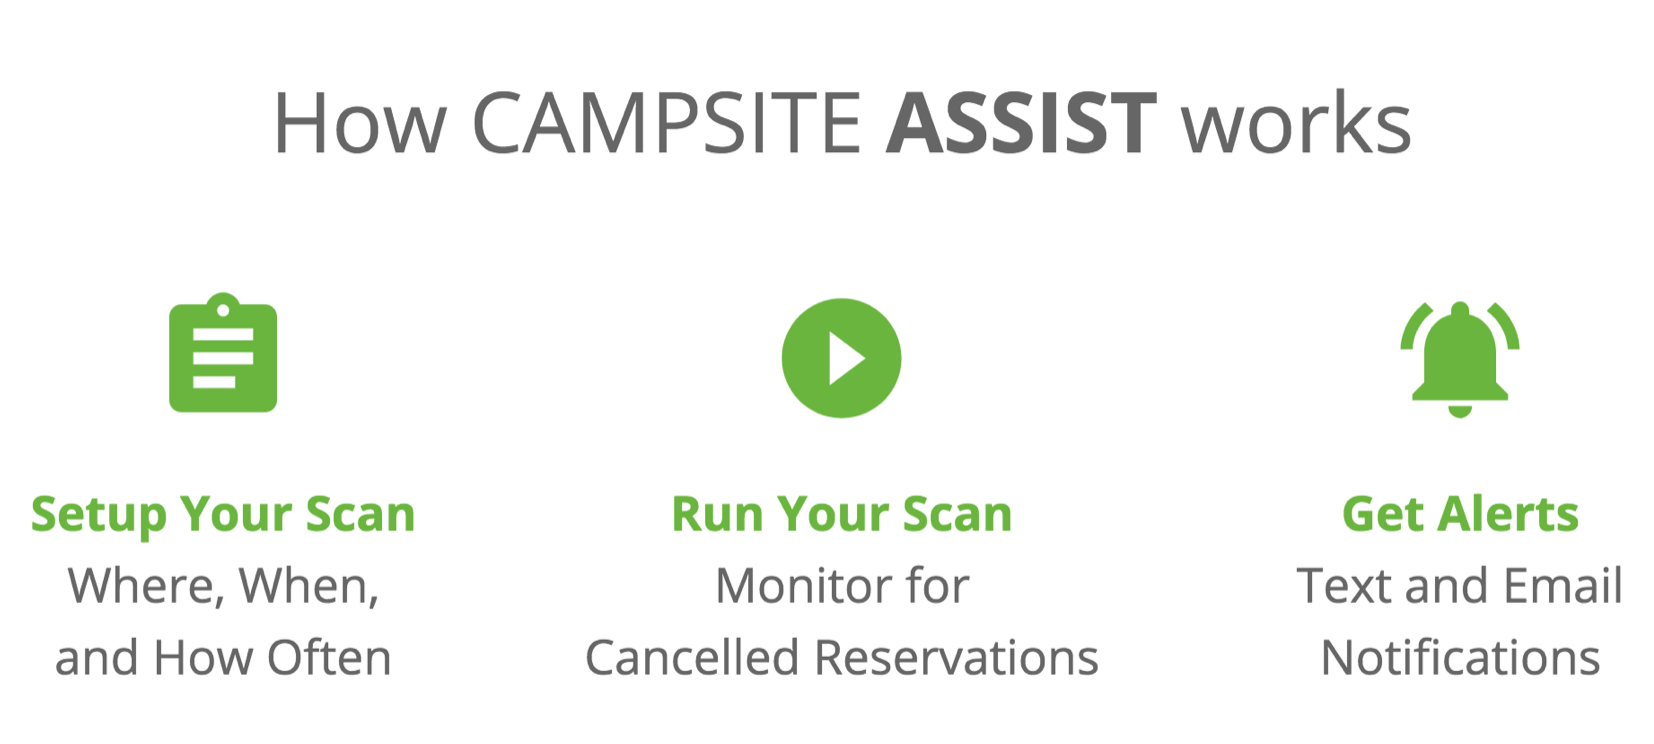 Washington State Parks Campsite Availability Alerts - How CSA Works